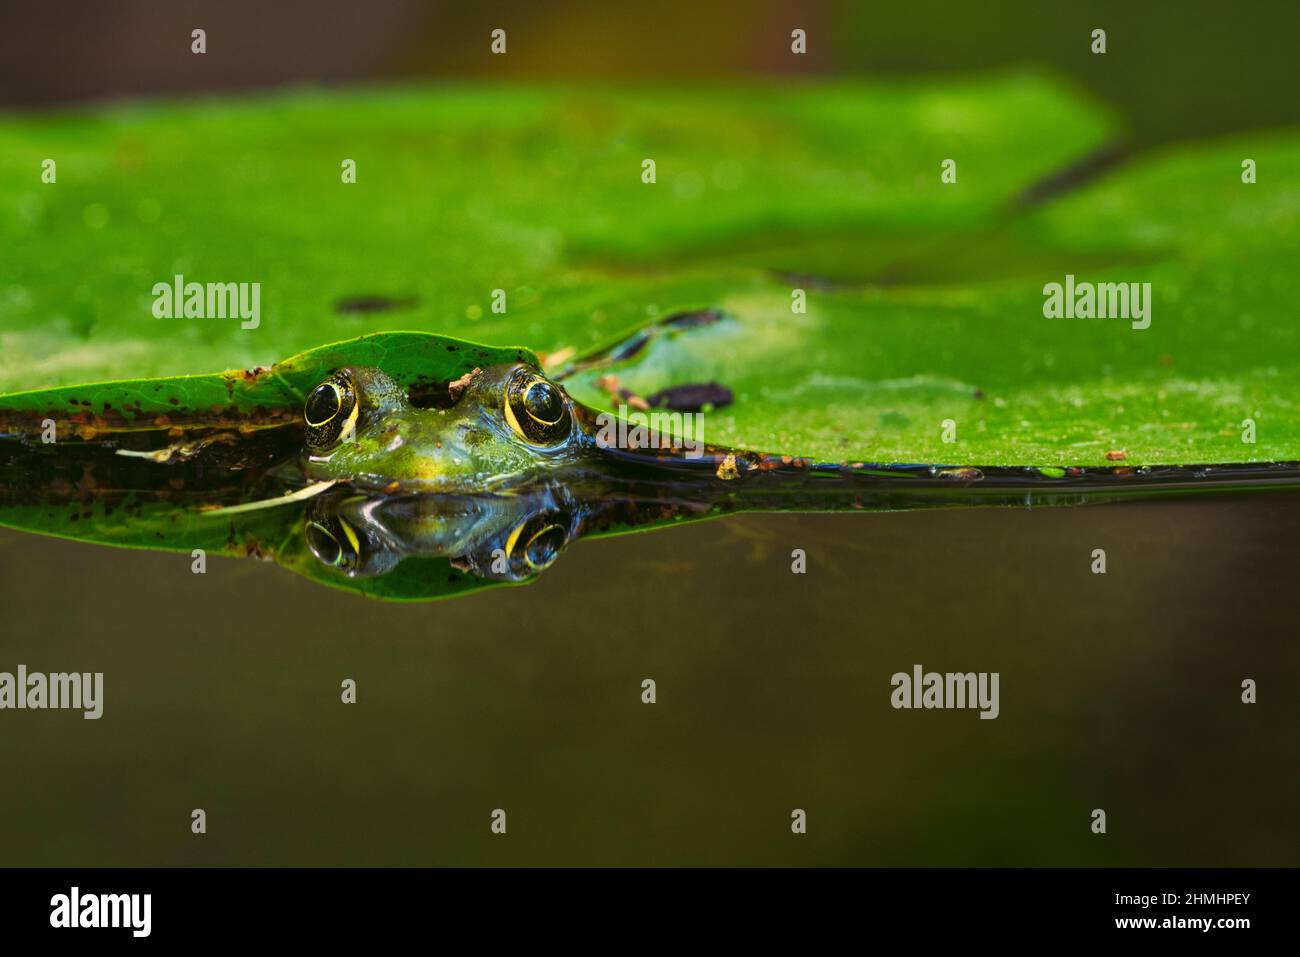 A Green Frog (Lithobates clamitans) enjoys a soak in a backyard pond while hiding from predators Stock Photo